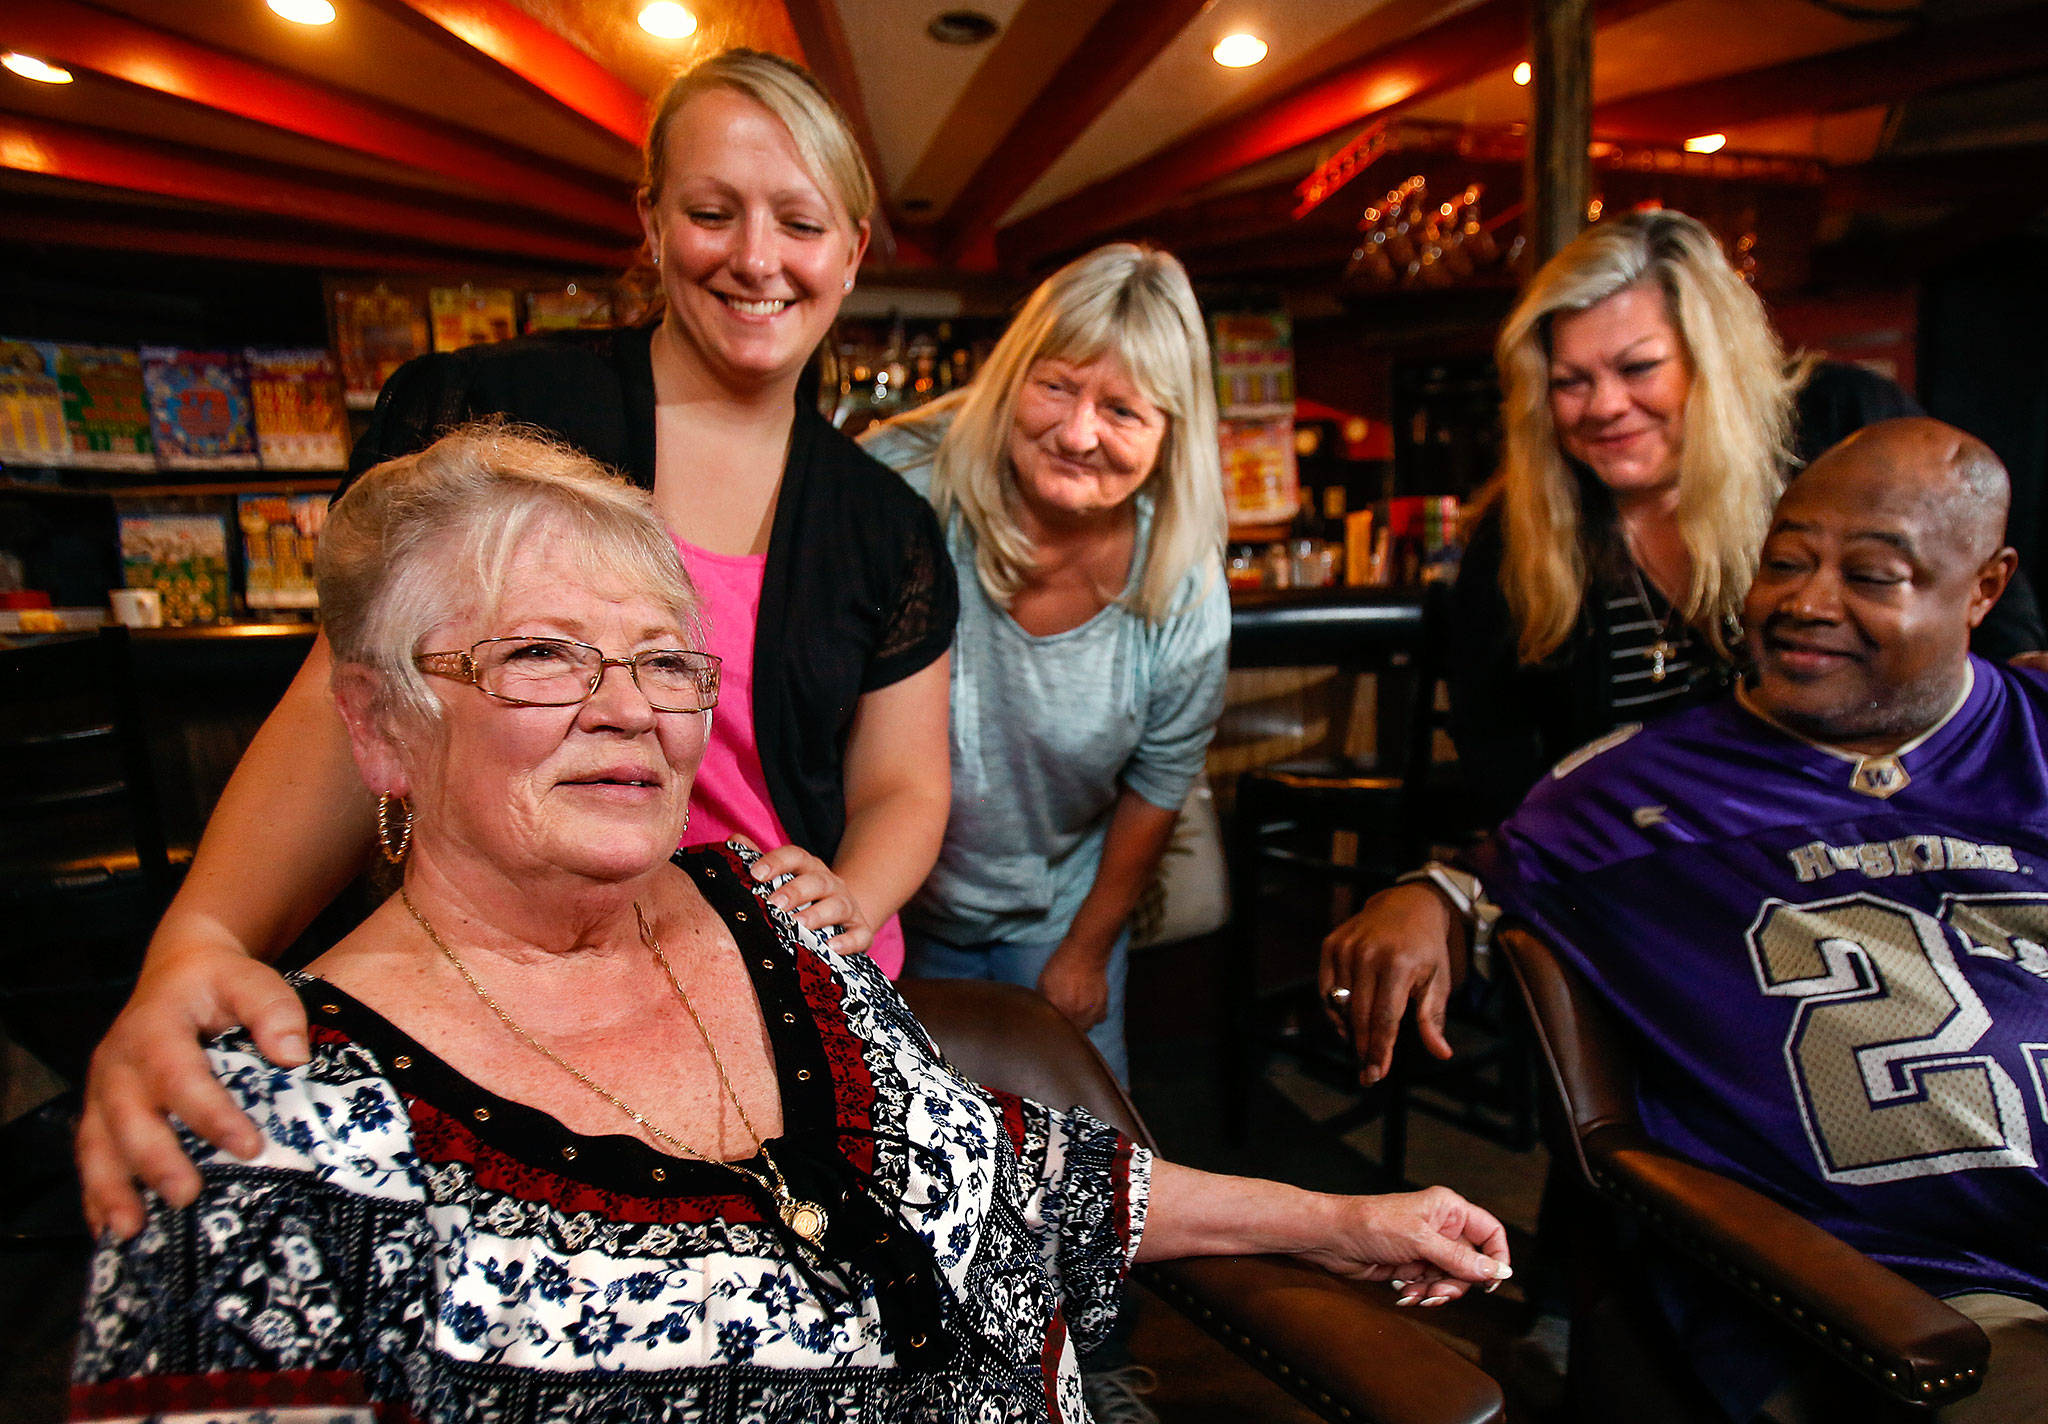 Sue Brauch, (left) a bartender for more than 50 years, is joined and celebrated by friends and colleagues Monday at Patty’s Eggnest, the longtime Chuckwagon Inn, on Evergreen. Behind Brauch at left is new bartender Tricia Flood, her mother and customer Linda Flood, restaurant manager Pam Gahan, and loyal customer Dwight Jeffries. Brauch, 76, is retiring this week after 13 years behind the bar at the Everett lounge and restaurant. (Dan Bates / The Herald)